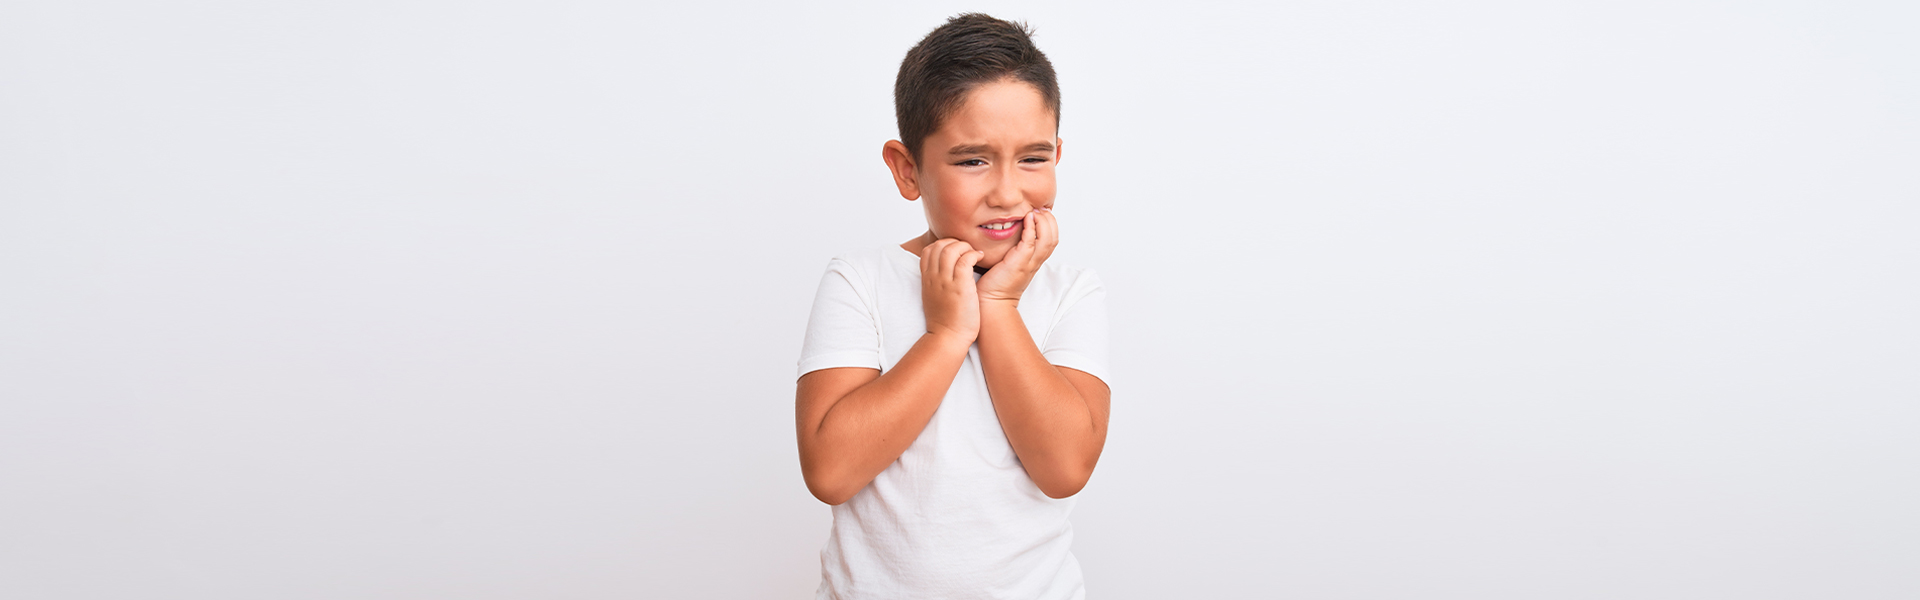 What Every Parent Should Know About Pediatric Dental Emergencies